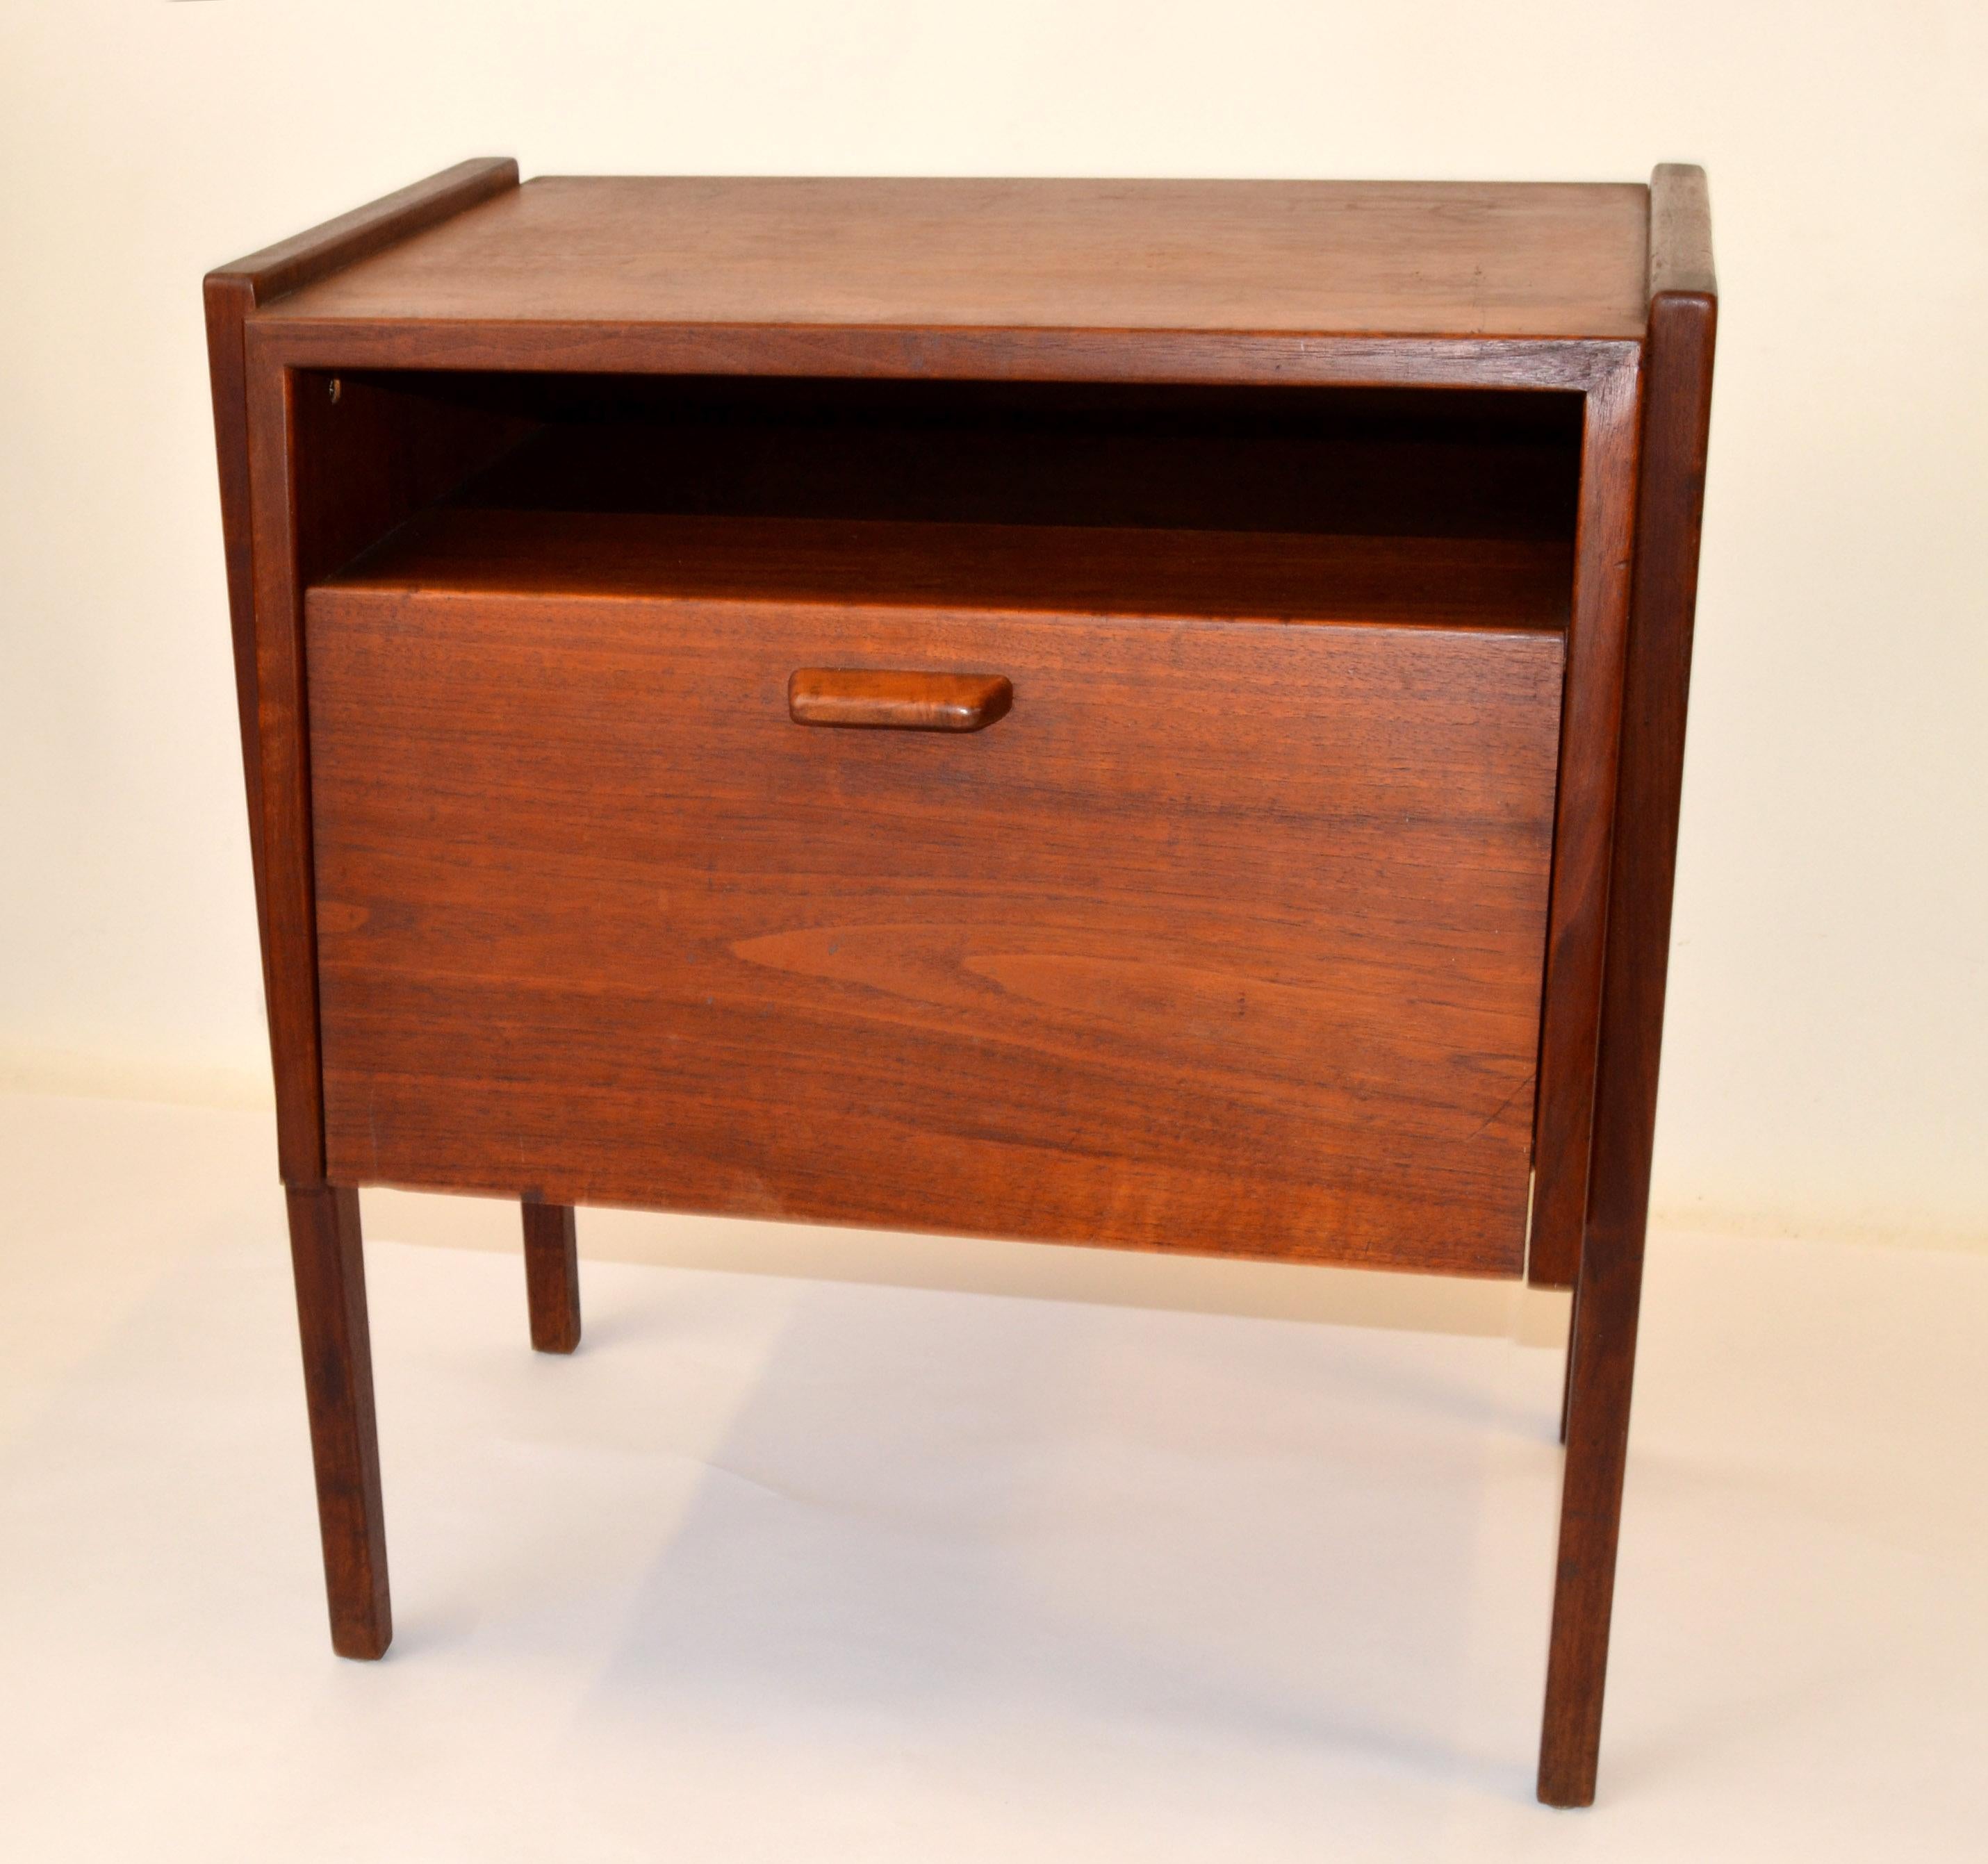 1950 Jens Risom designed walnut nightstand, bedside table or end table for Knoll.
Features one drop door and a storage shelf above, perfectly suited for storing necessaries and numerous small items.
Scandinavian Modern Craftsmanship made in